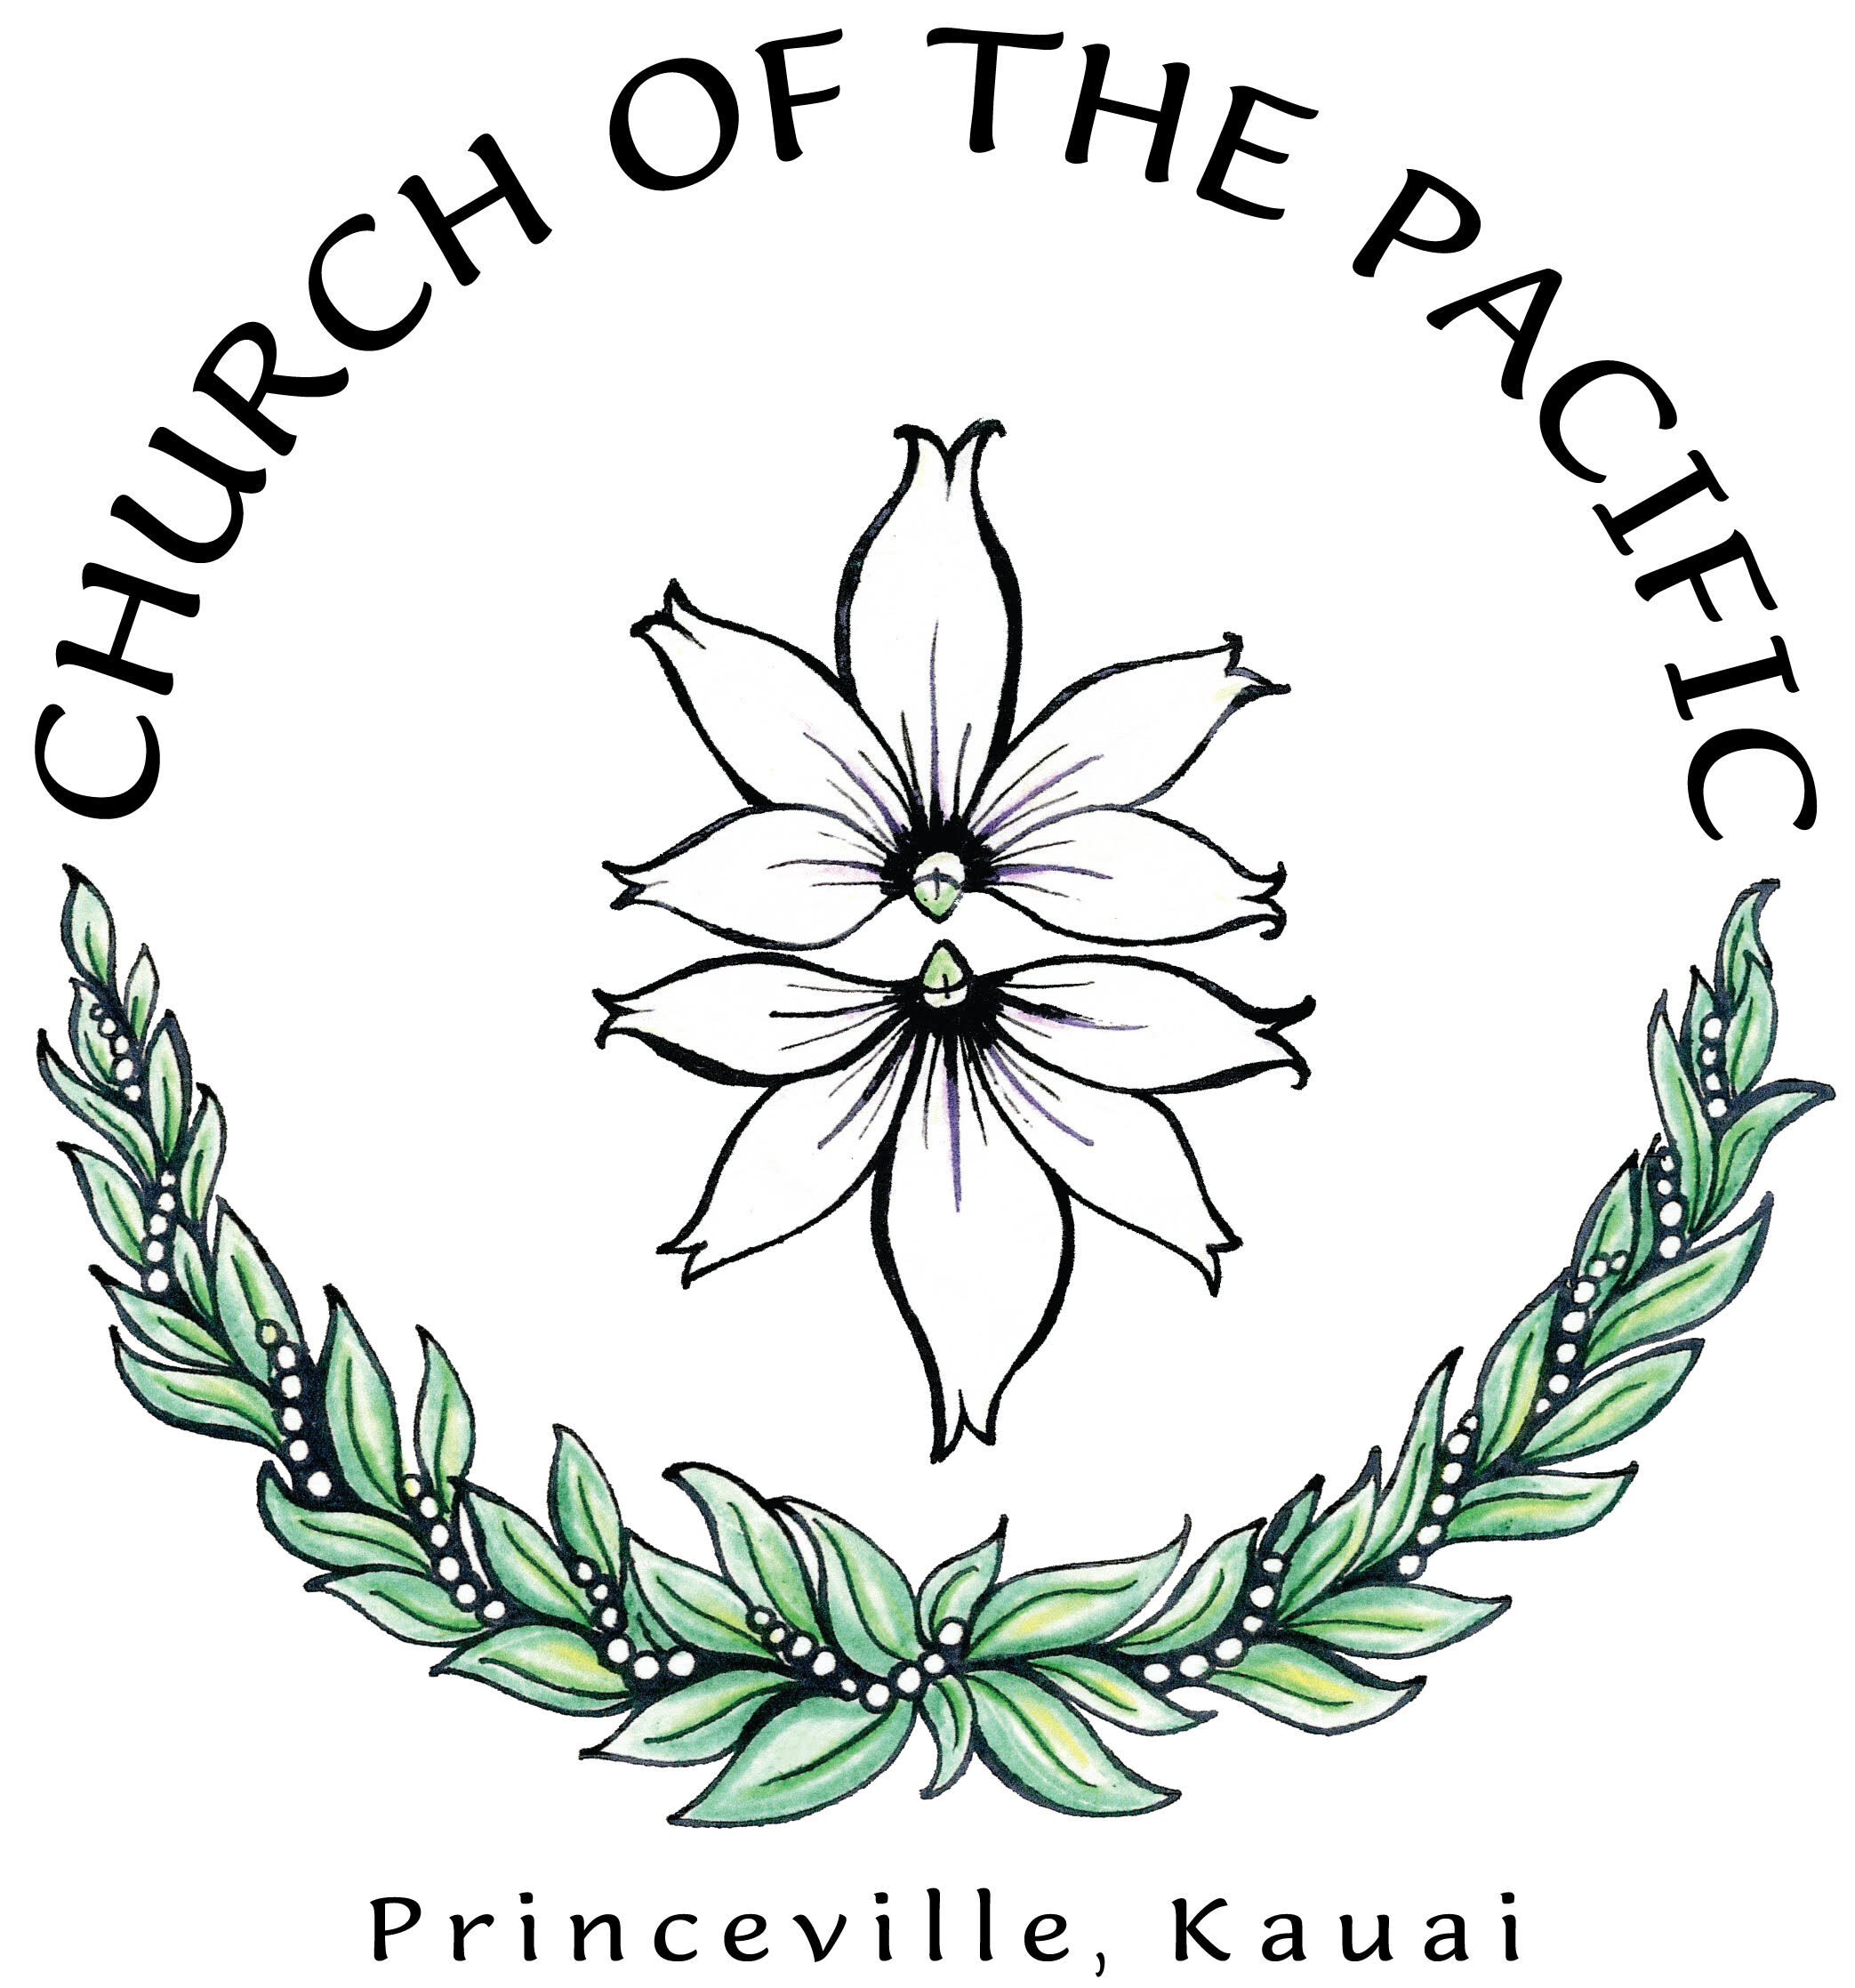 Church of the Pacific